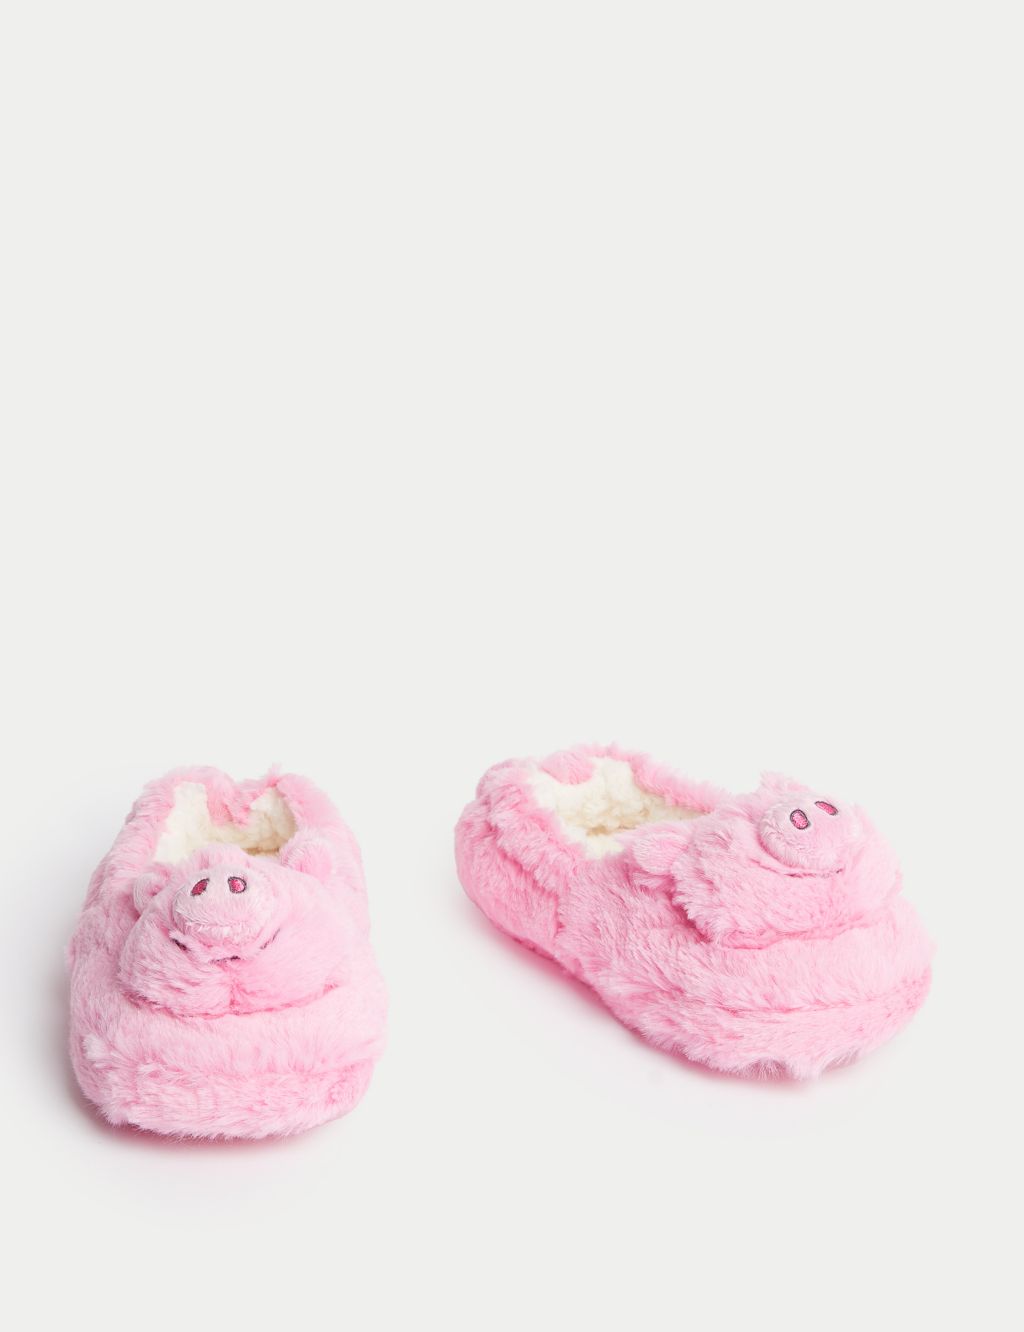 Kids' Percy Pig™ Slippers (5 Small - 6 Large) image 2